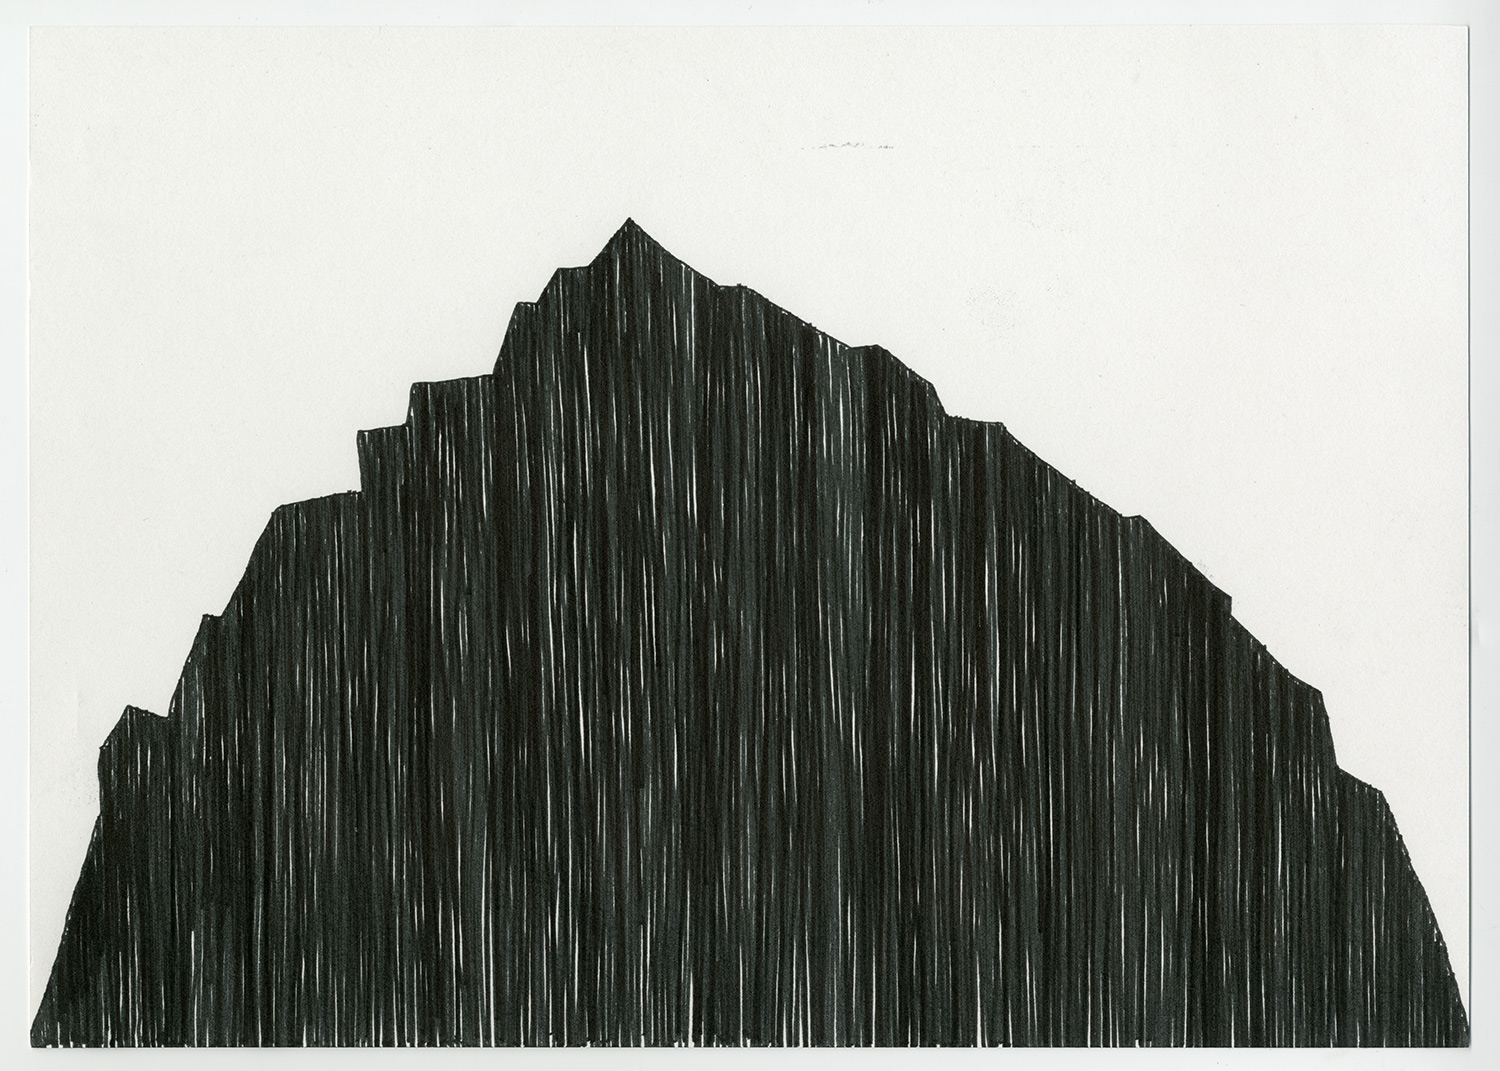   Absent Mountain , 2017  1 of 2 drawings (Diptych) 